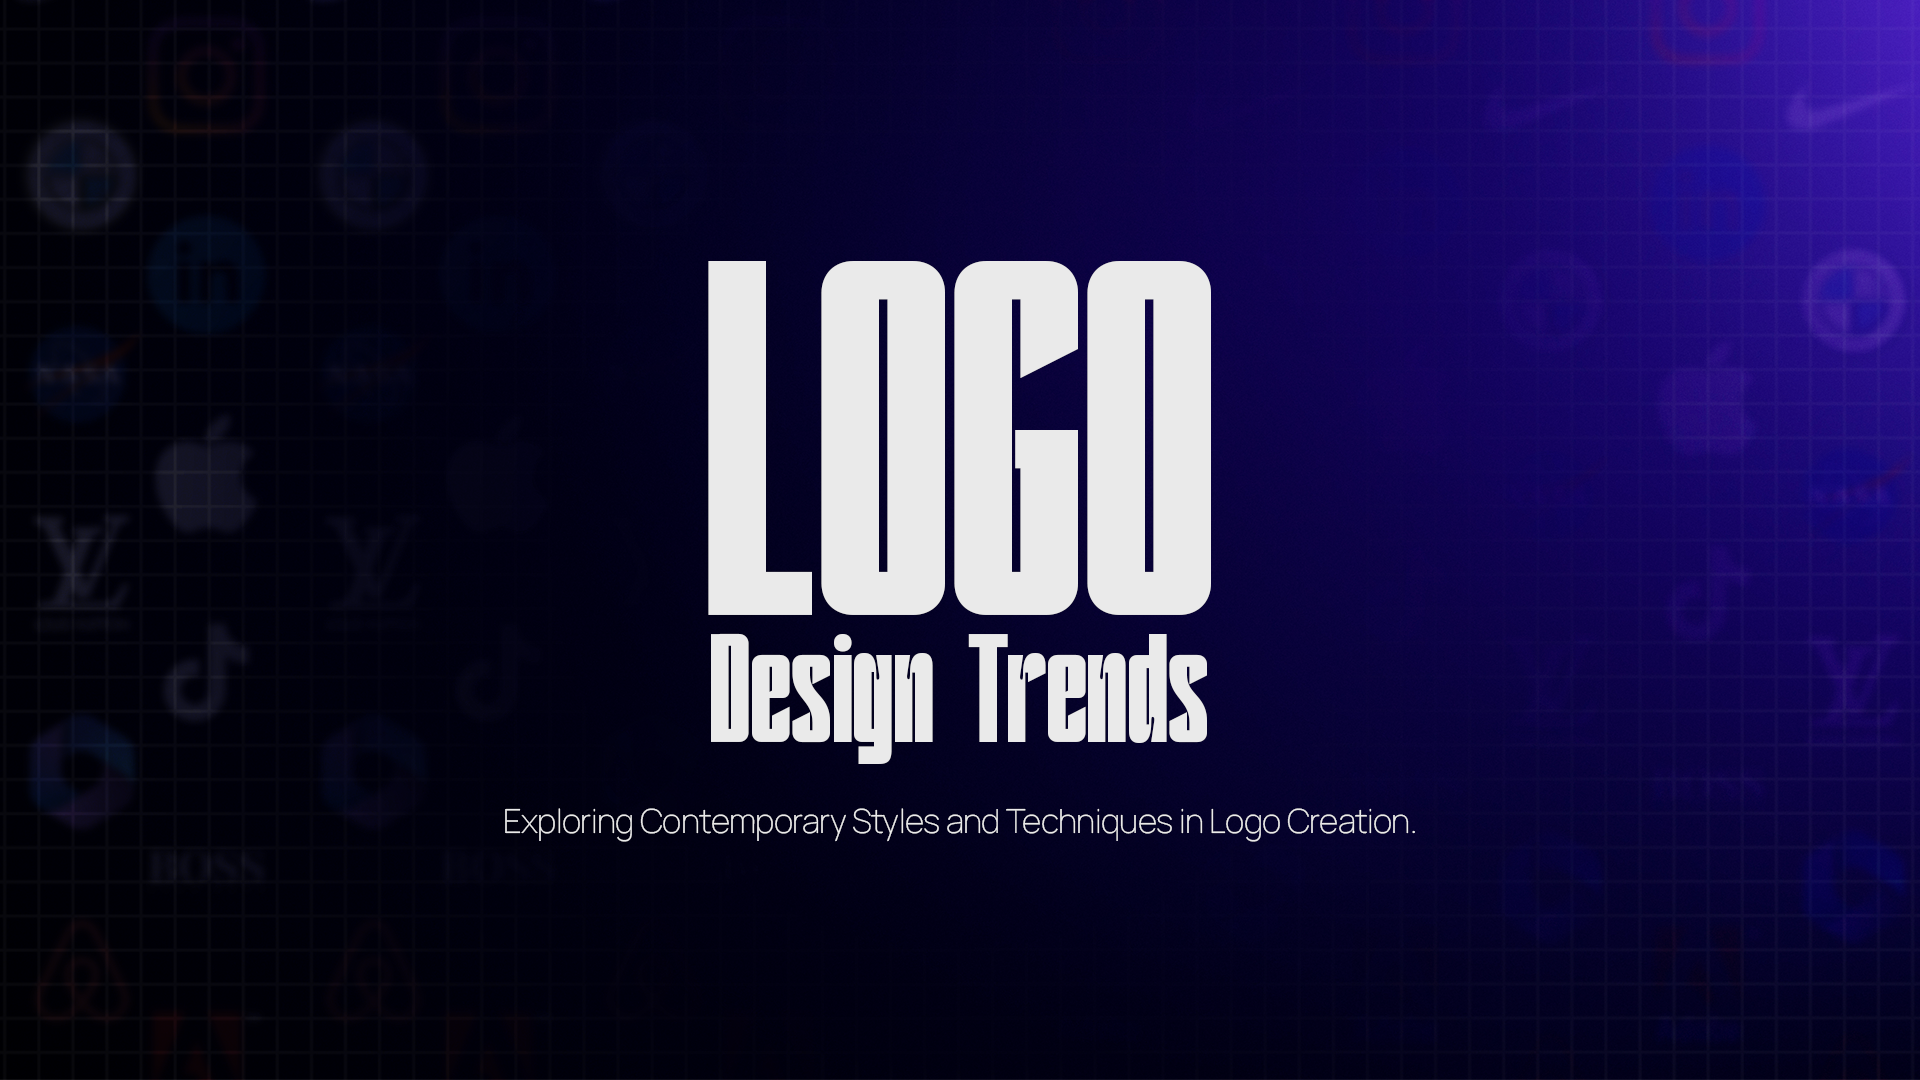 Logo Design Trends: Exploring Contemporary Styles and Techniques in Logo Creation